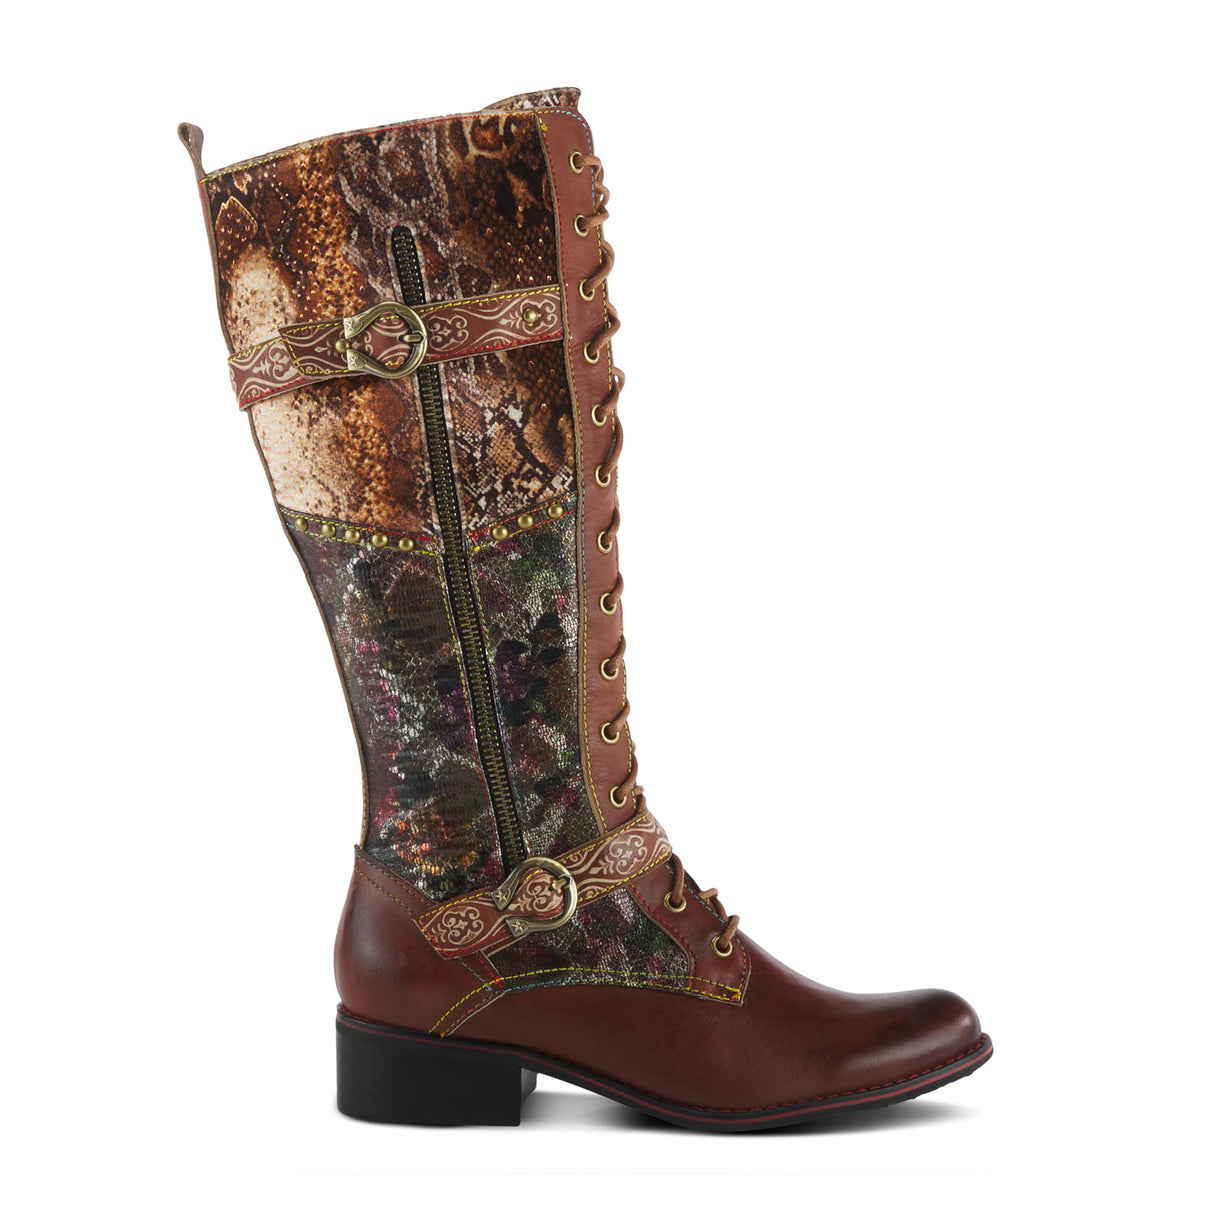 L'Artiste Vaneyck Tall Boot (Women) - Brown Multi Boots - Fashion - High - The Heel Shoe Fitters